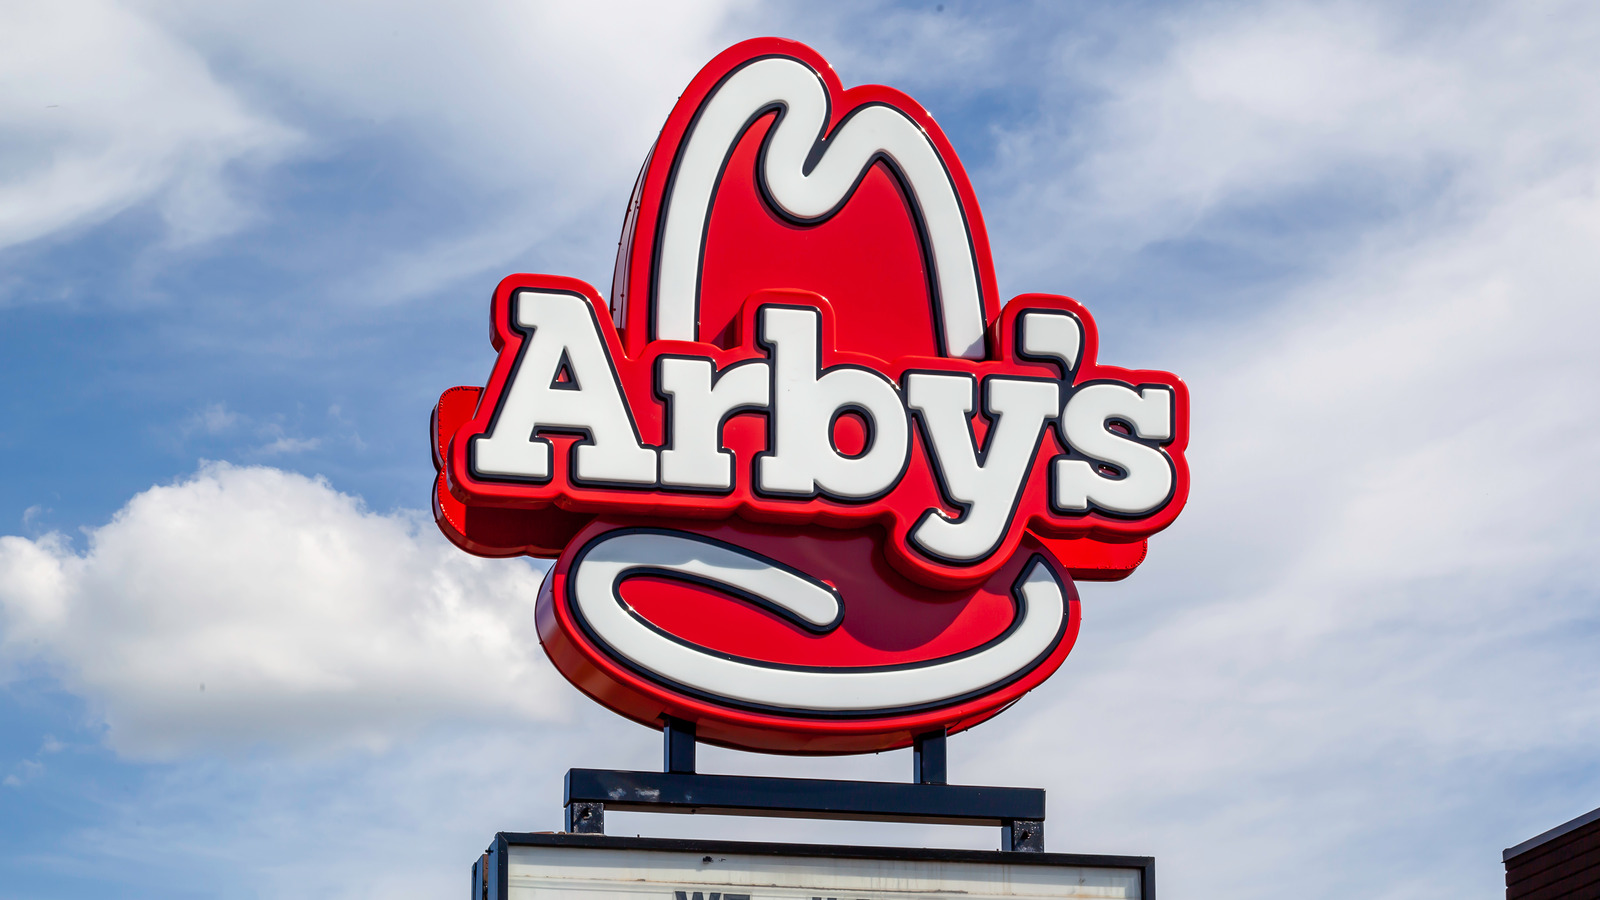 https://www.mashed.com/img/gallery/the-real-reason-arbys-crinkle-fries-are-crispier-than-others/l-intro-1618183605.jpg